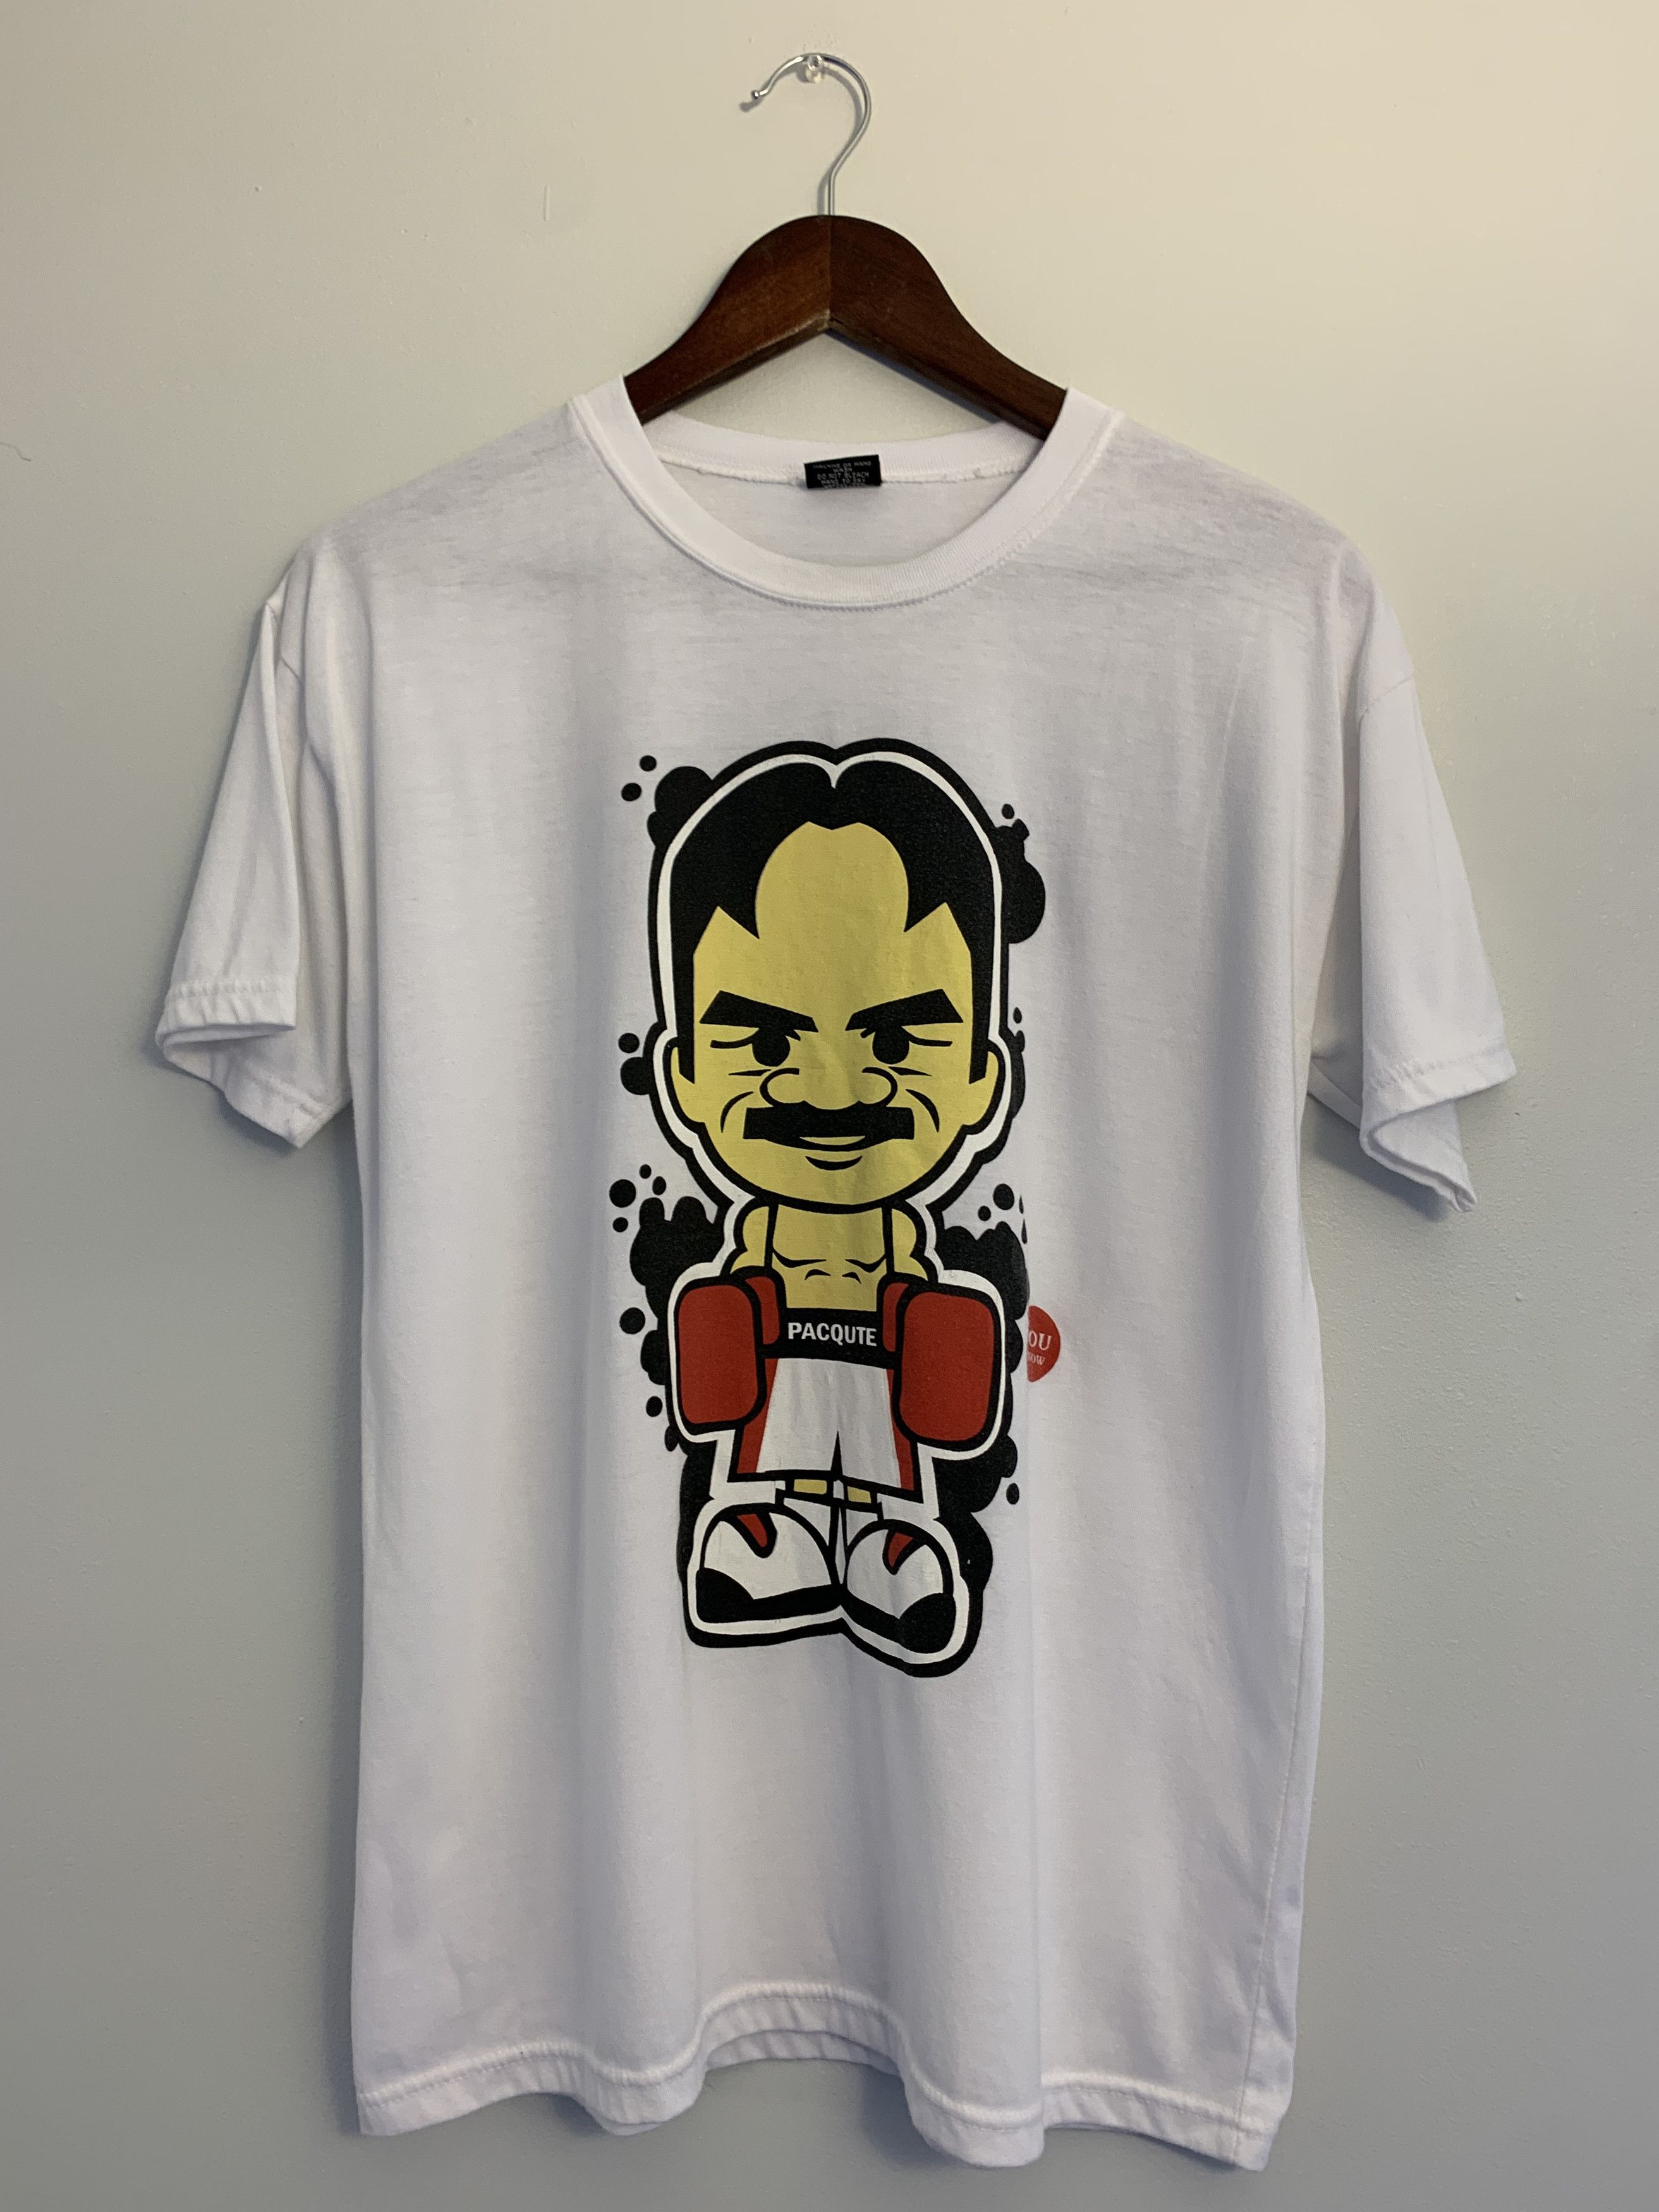 Manny Pacquiao Vintage Shirt